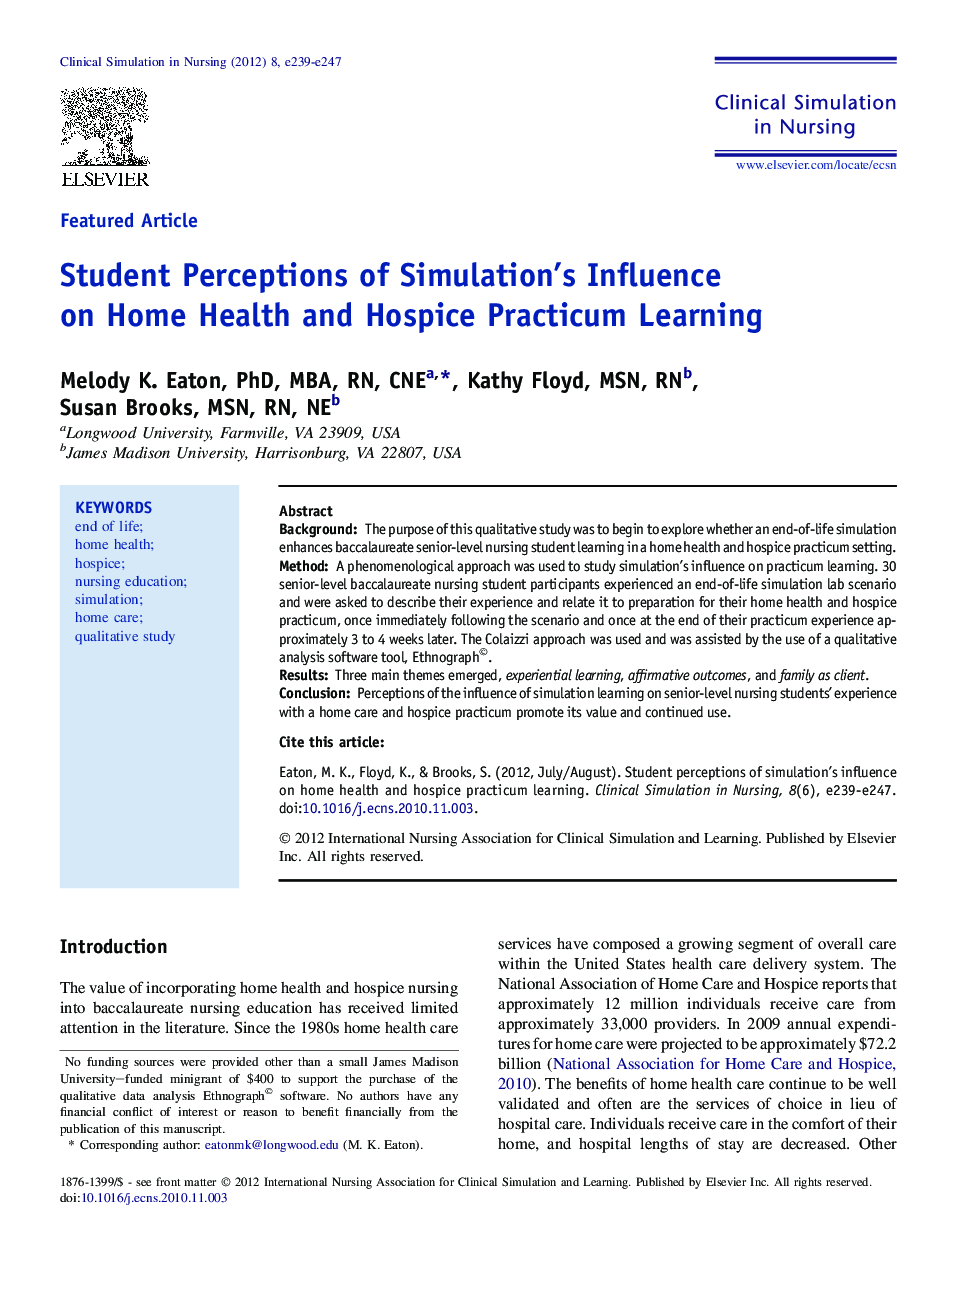 Student Perceptions of Simulation's Influence on Home Health and Hospice Practicum Learning 